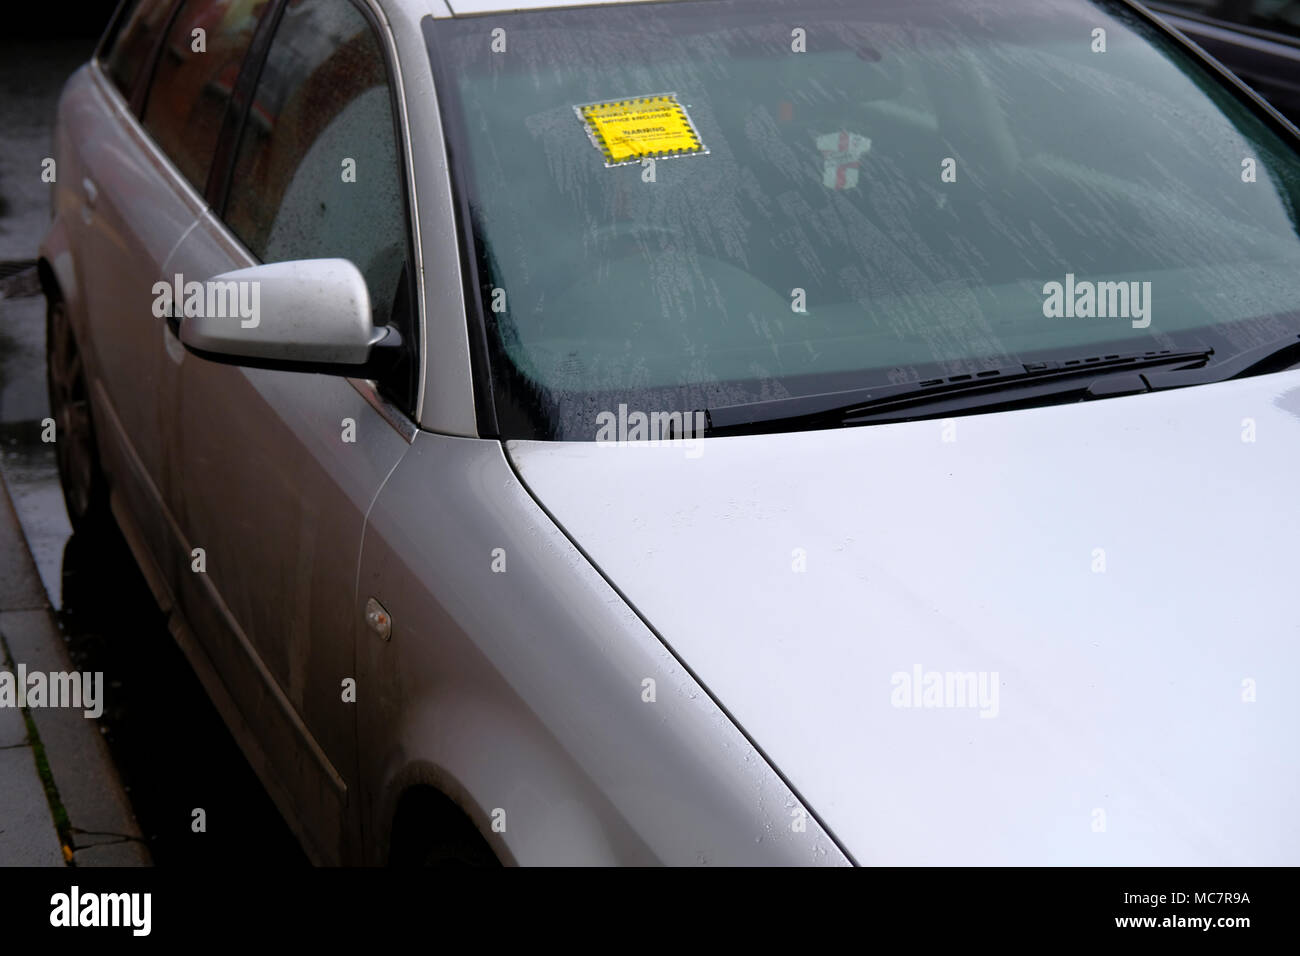 Penalty Charge for illegal parking. Parking ticket stuck on windscreen of a car Stock Photo